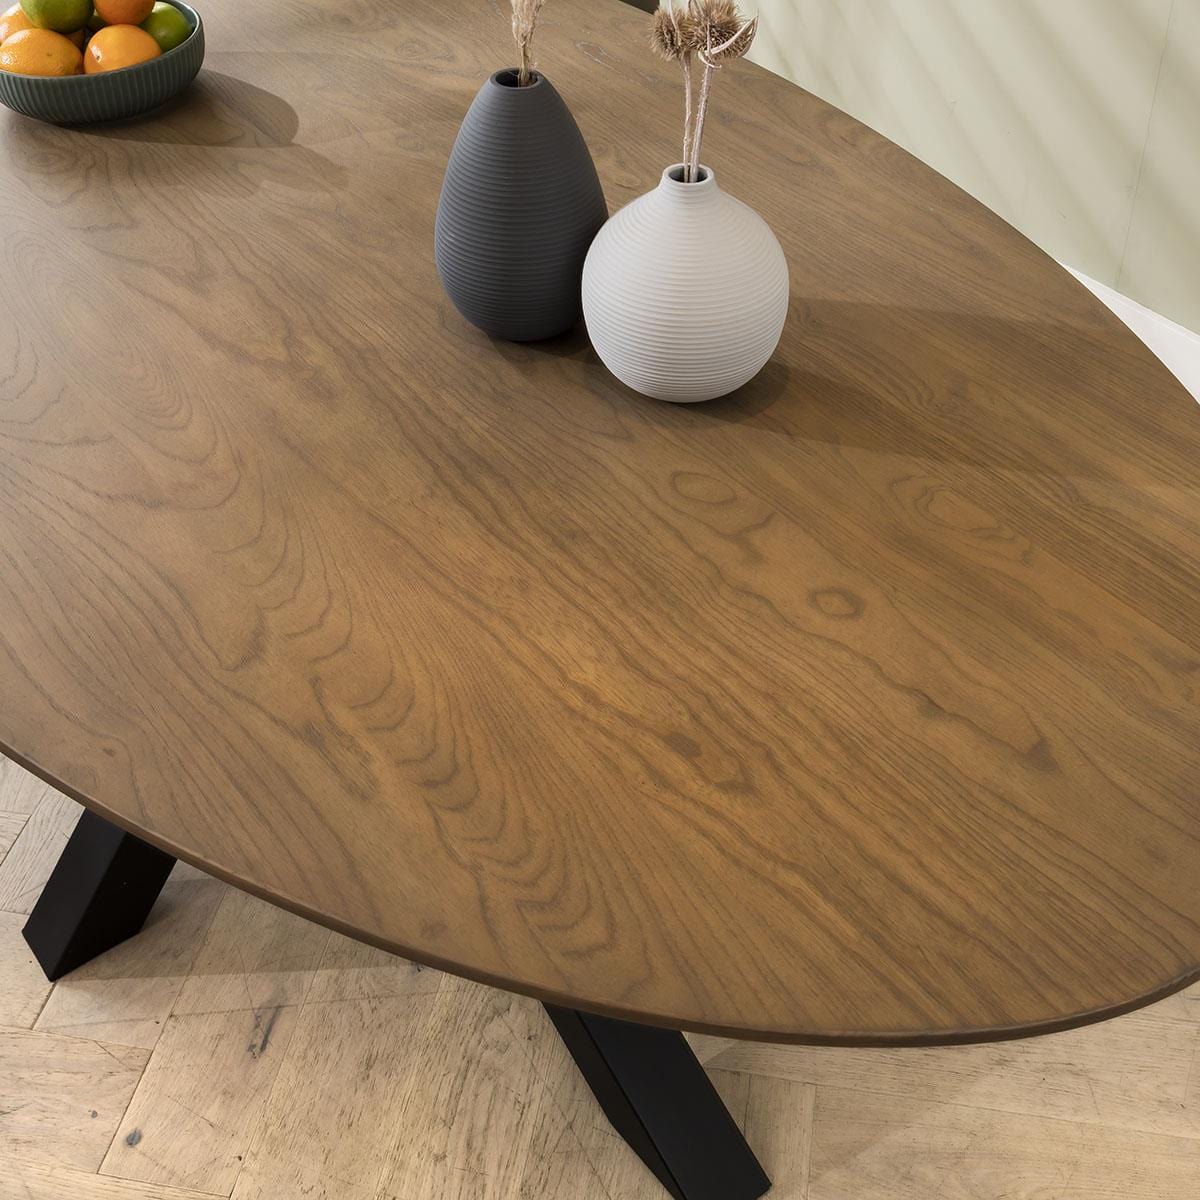 Quatropi Aries 6 Seater Solid Wooden Oval Dining Table 200cm